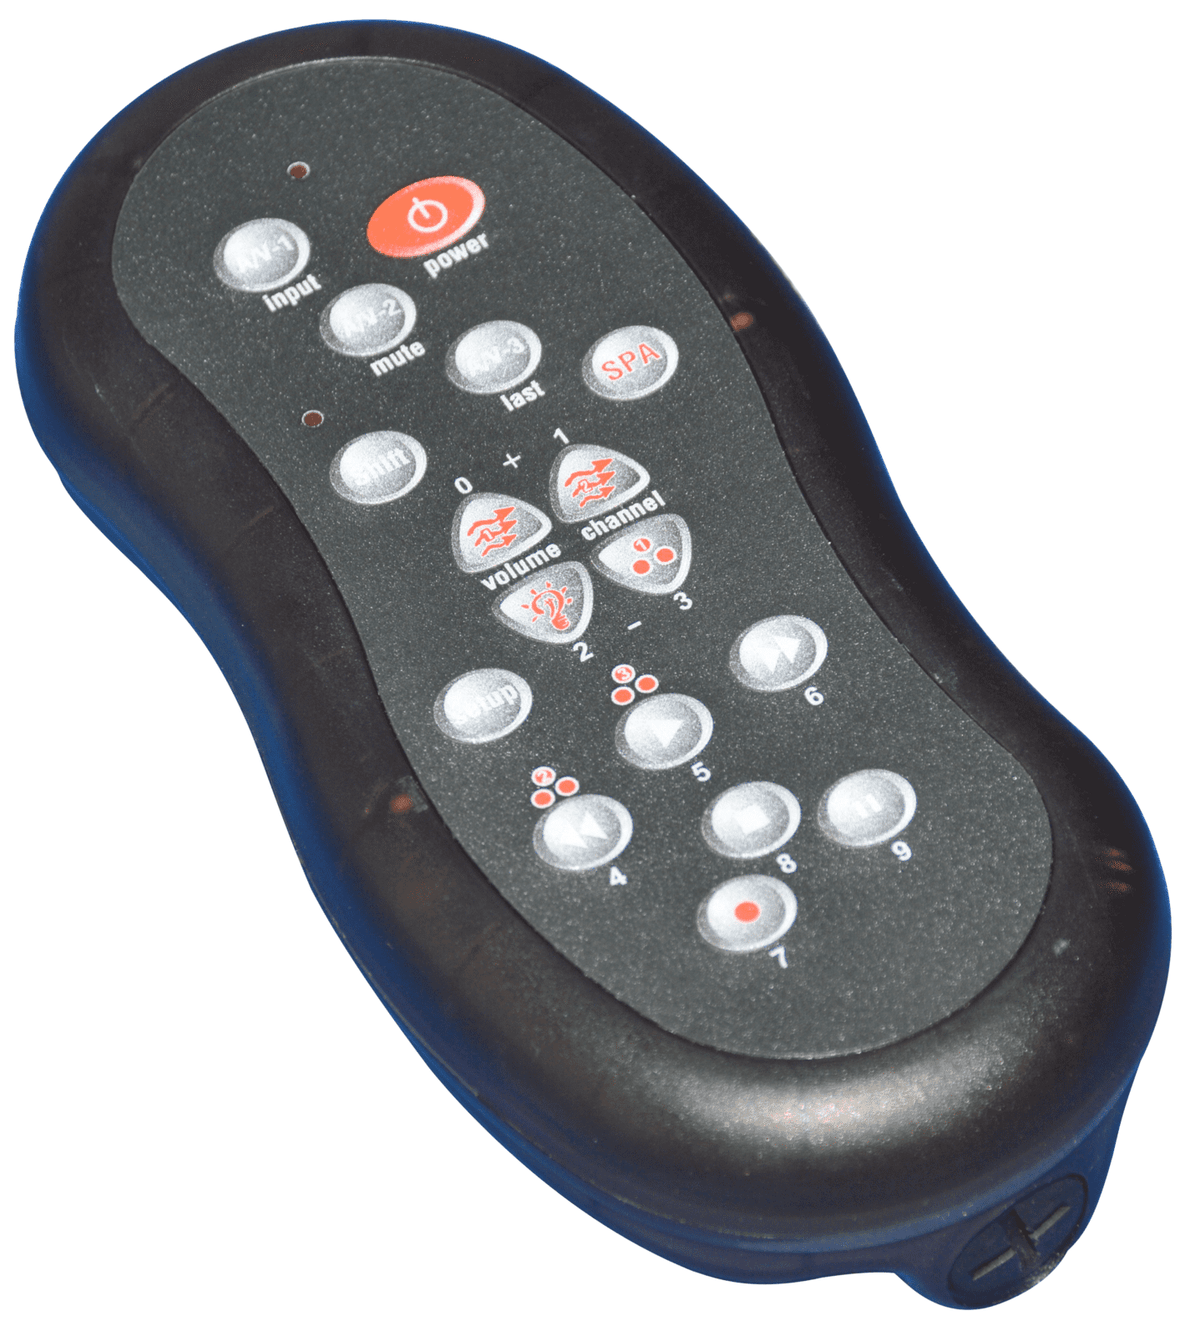 Aeware IRMT-4 Universal Infra-red Floating Remote